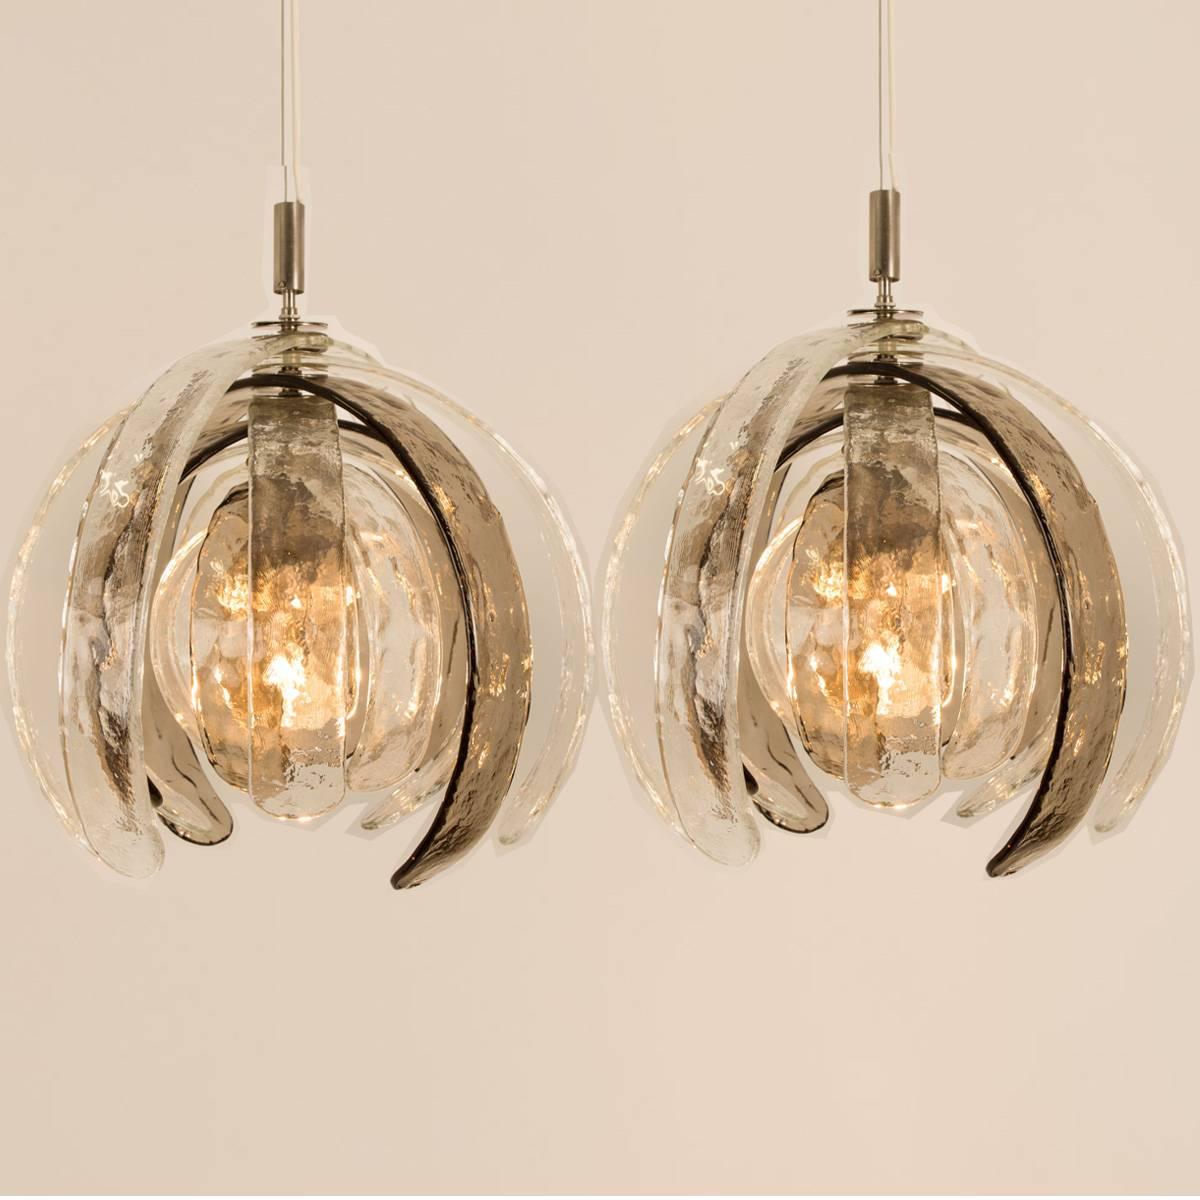 Mid-Century Modern Pair of Sculptural Artichoke Chandeliers by Carlo Nason for Mazzega, Italy